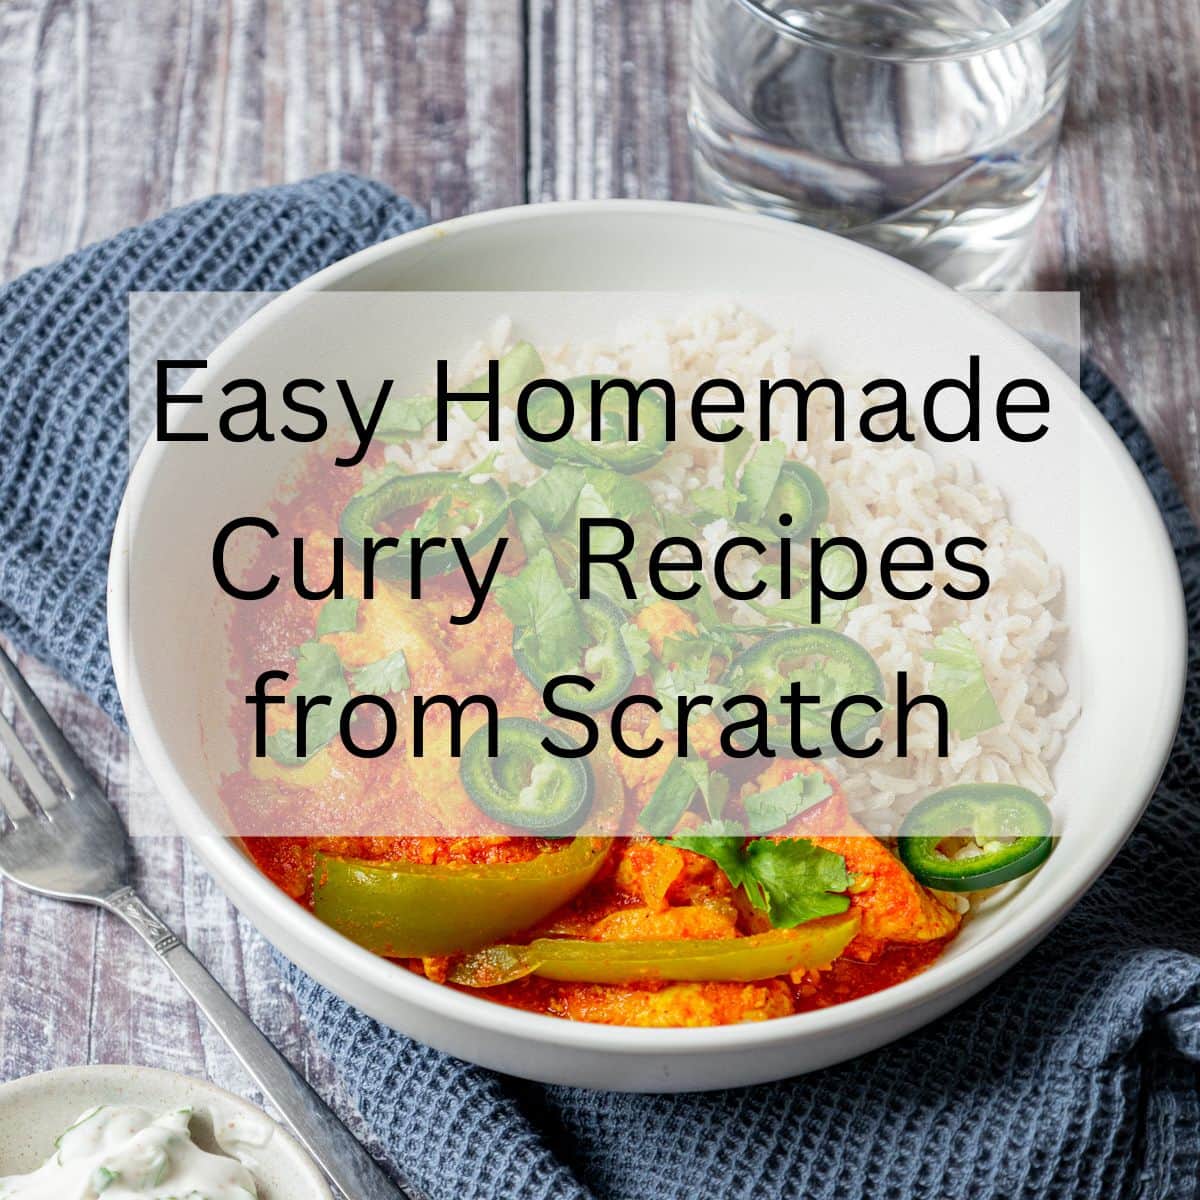 Easy homemade curry recipes from scratch